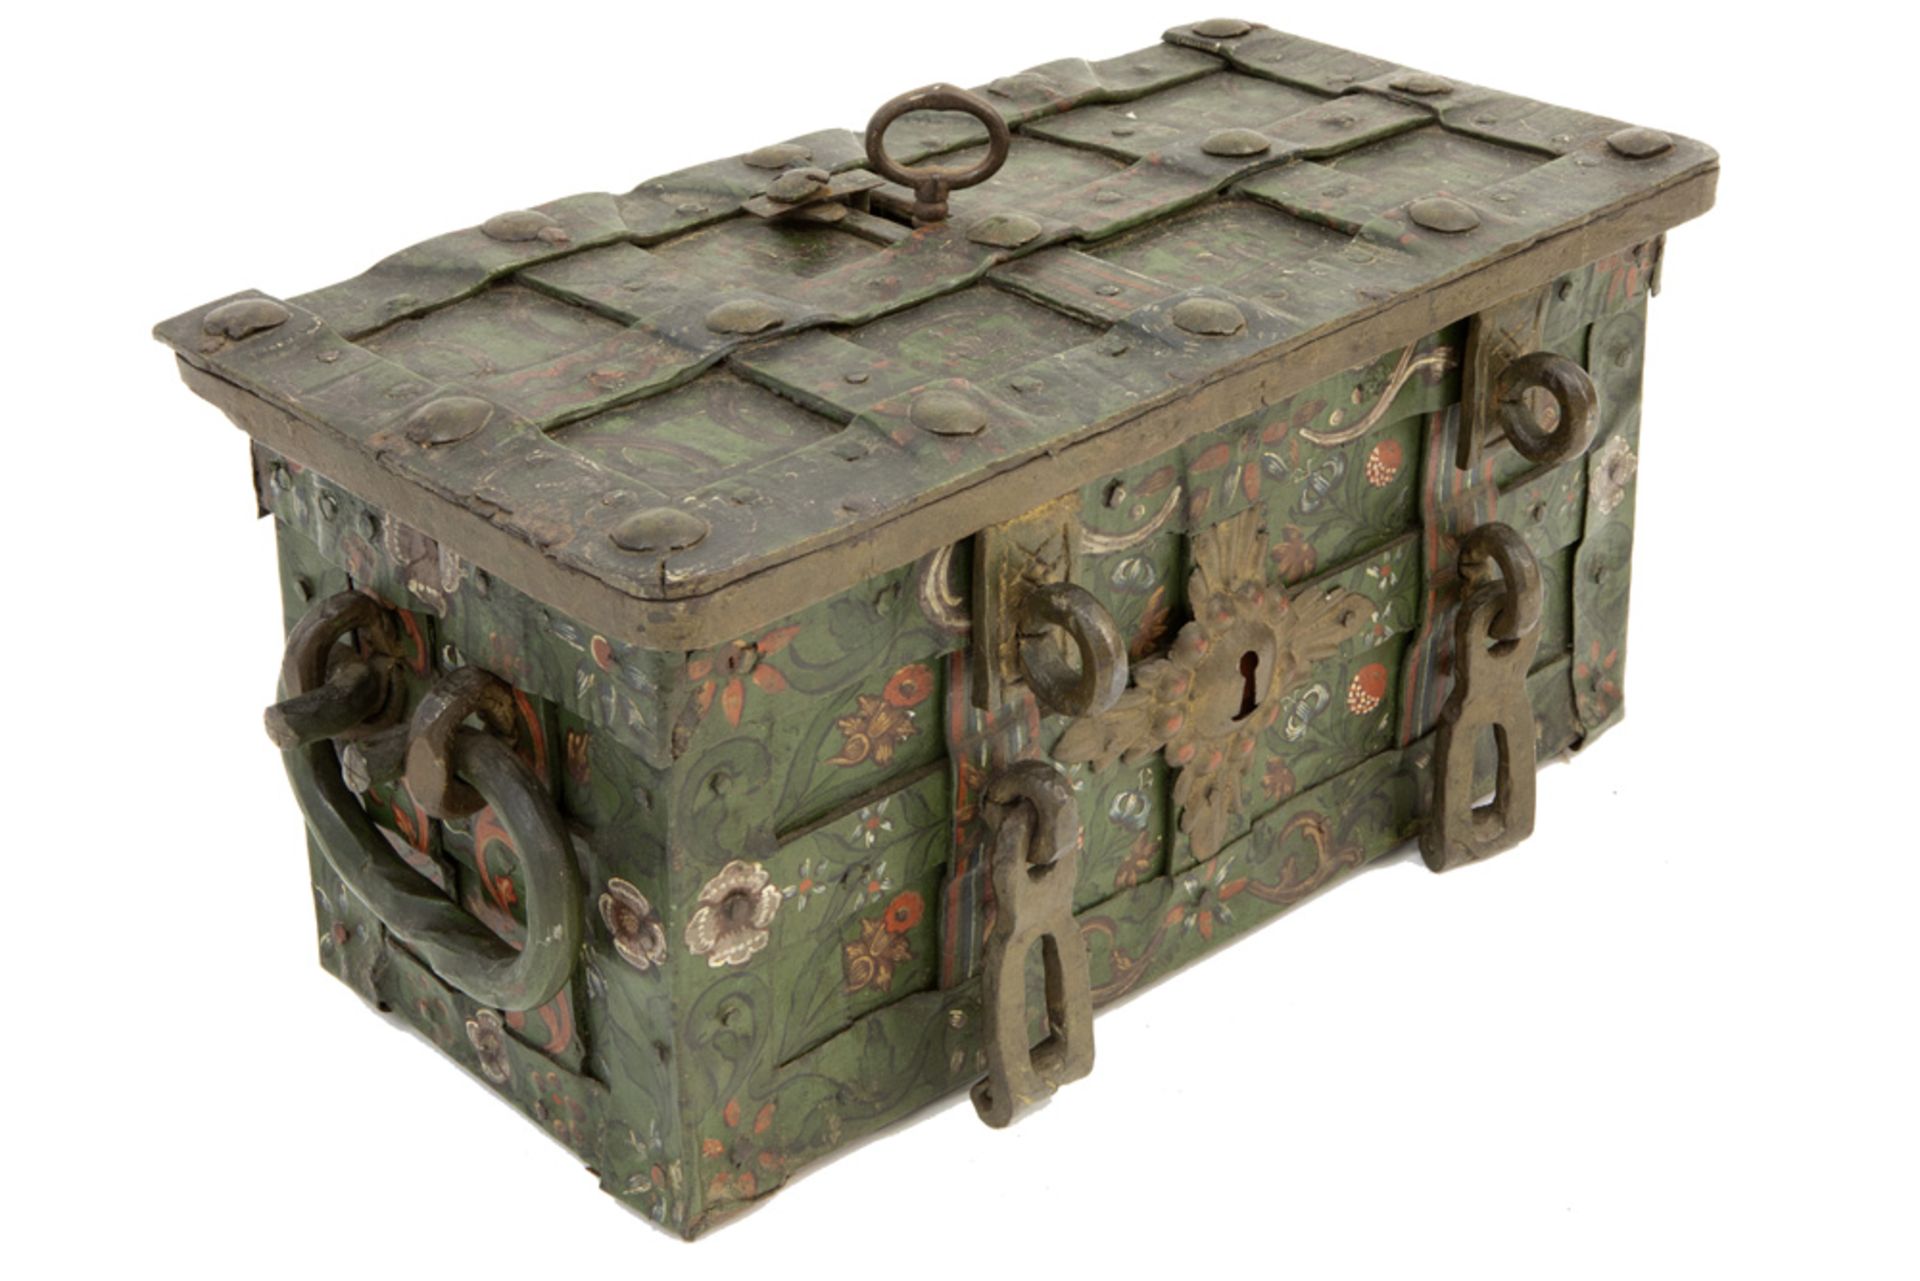 because of the small size rare 17th Cent. money chest/box in iron with its original well preserved